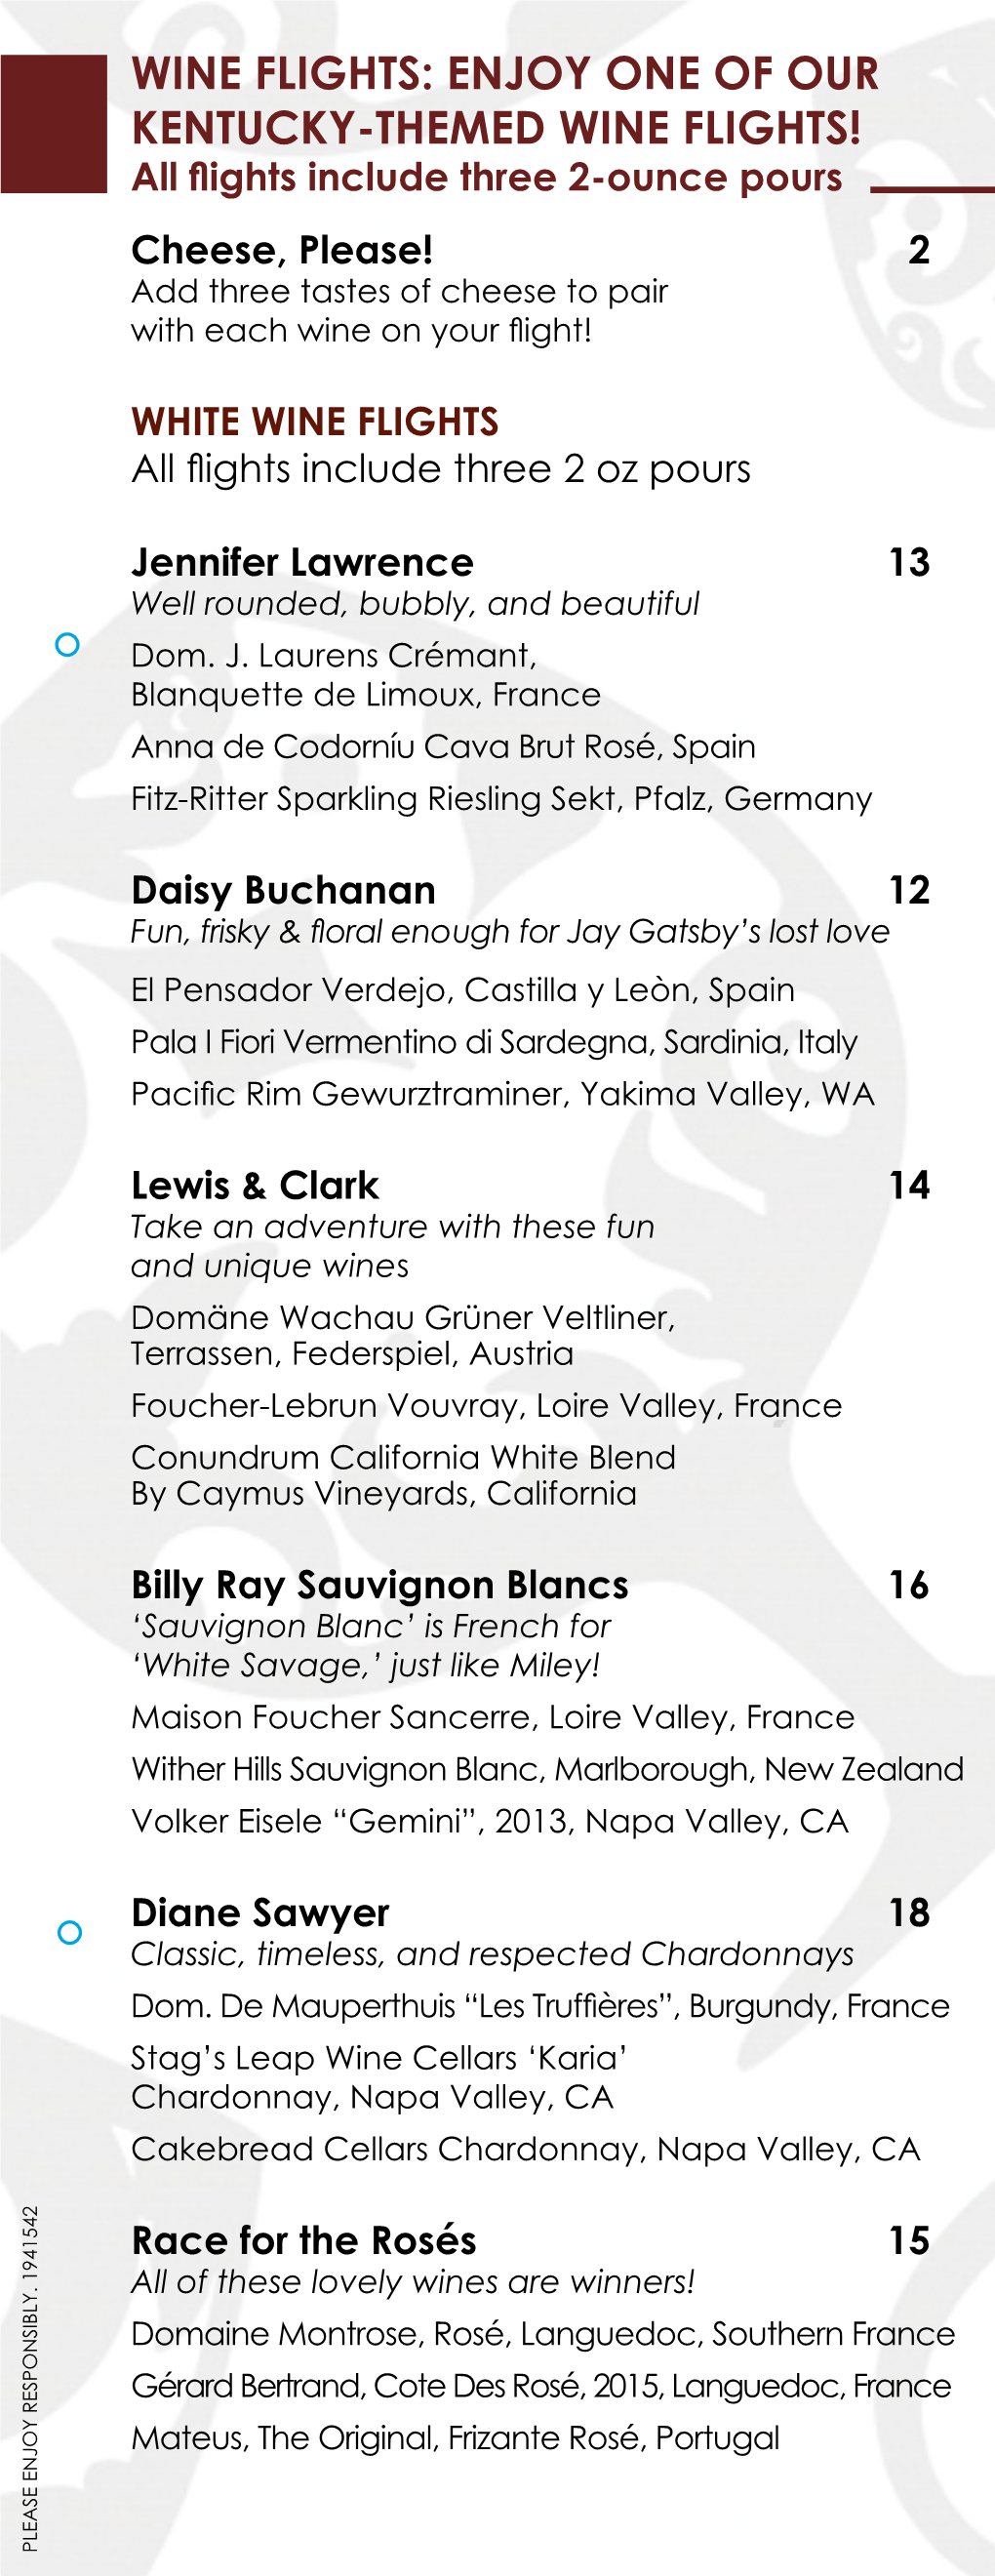 Wine Flights: Enjoy One of Our Kentucky-Themed